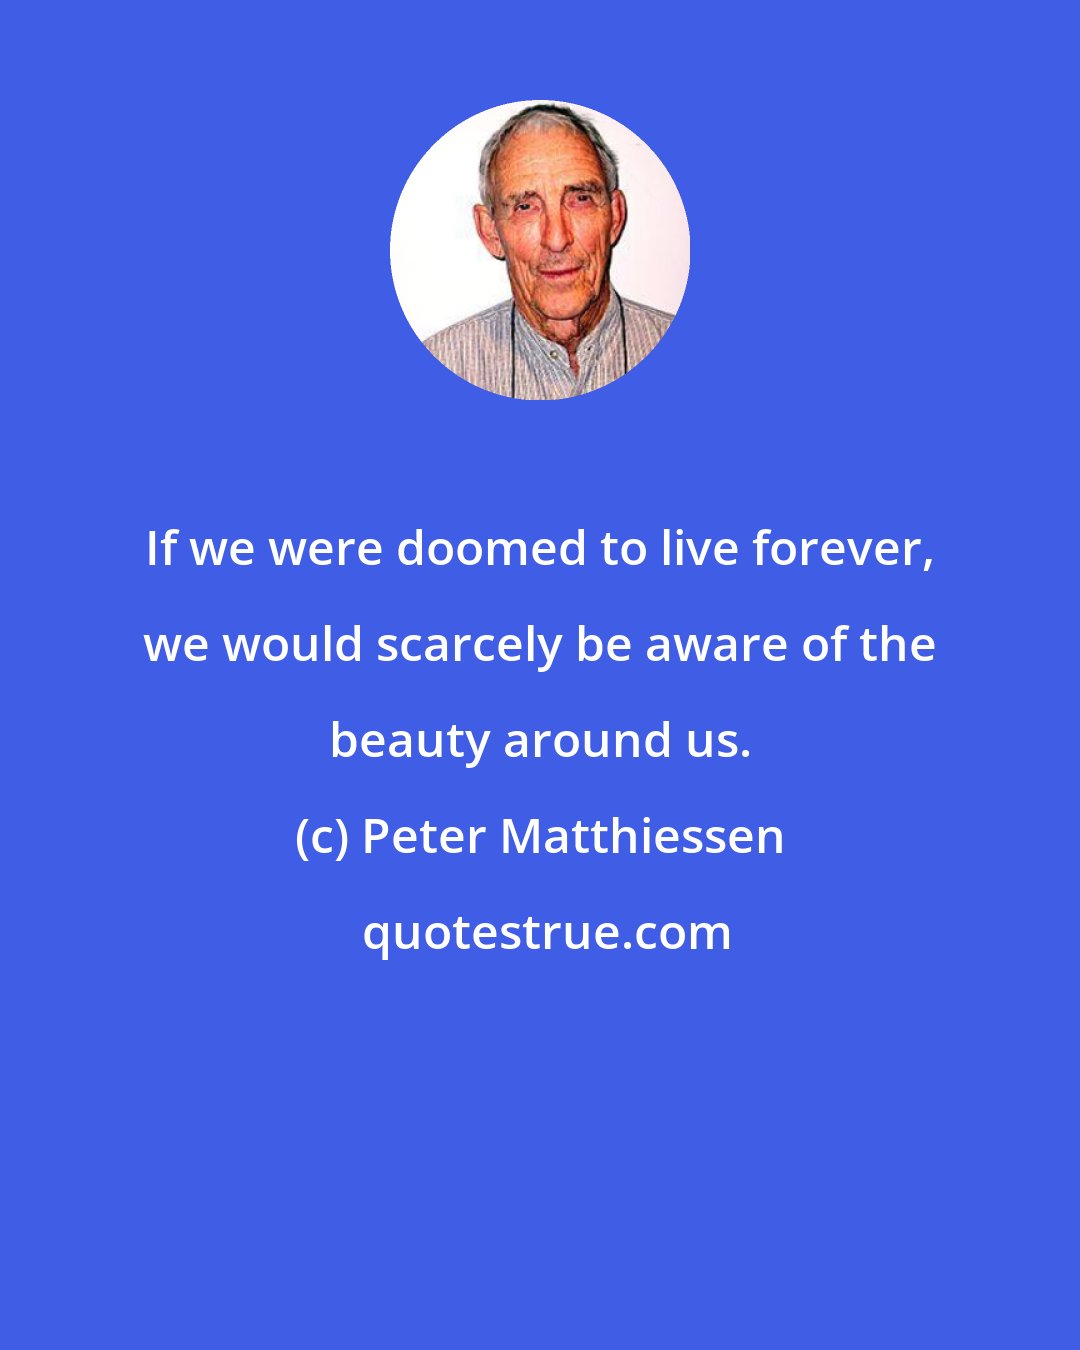 Peter Matthiessen: If we were doomed to live forever, we would scarcely be aware of the beauty around us.